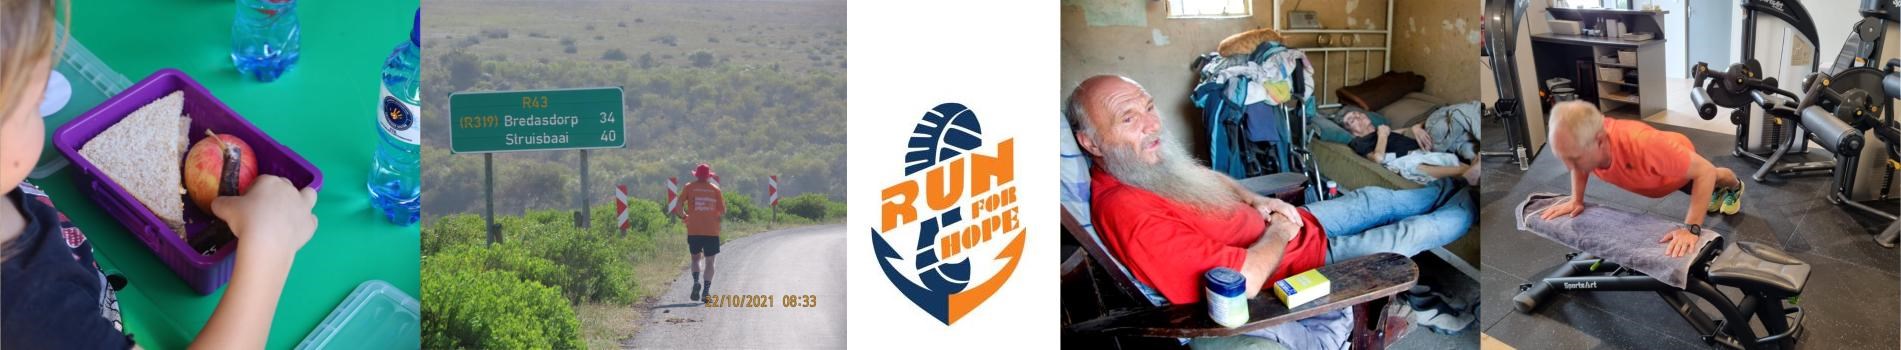 8 marathons in 8 days to feed a hungry child | Run For Hope Pilgrimage